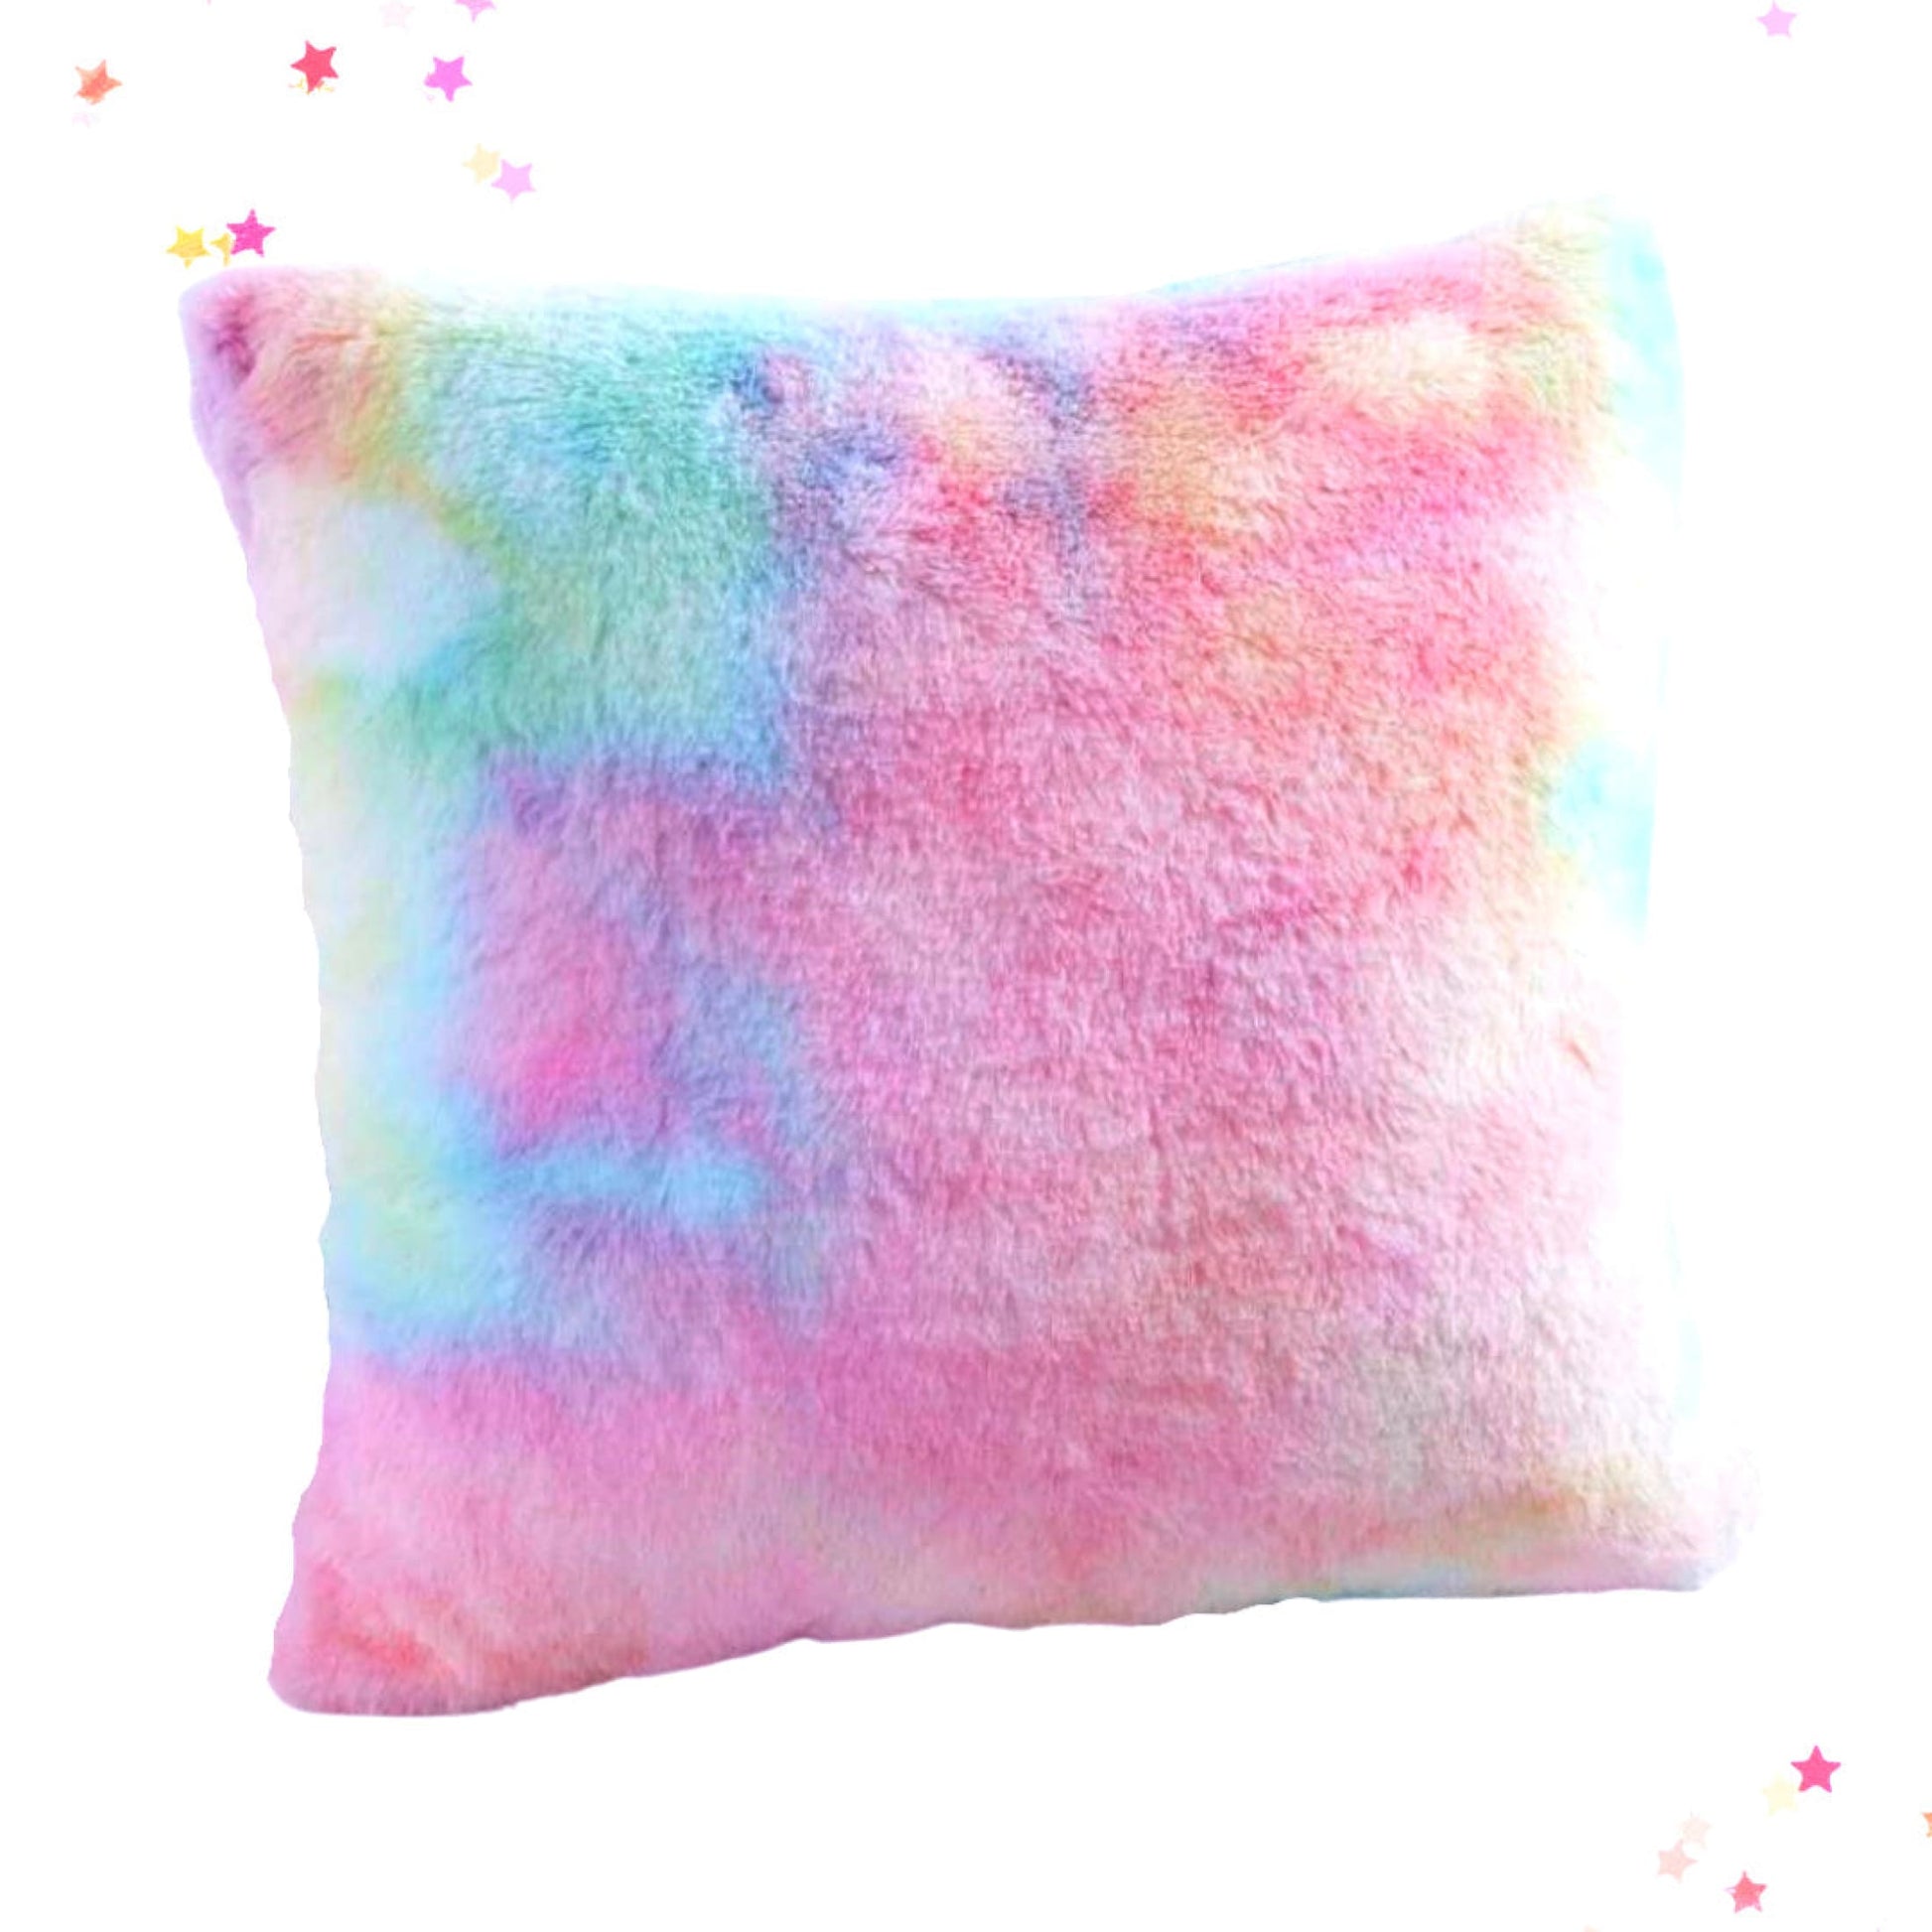 Pastel Tie-Dye Plush Cushion Cover from Confetti Kitty, Only 9.99